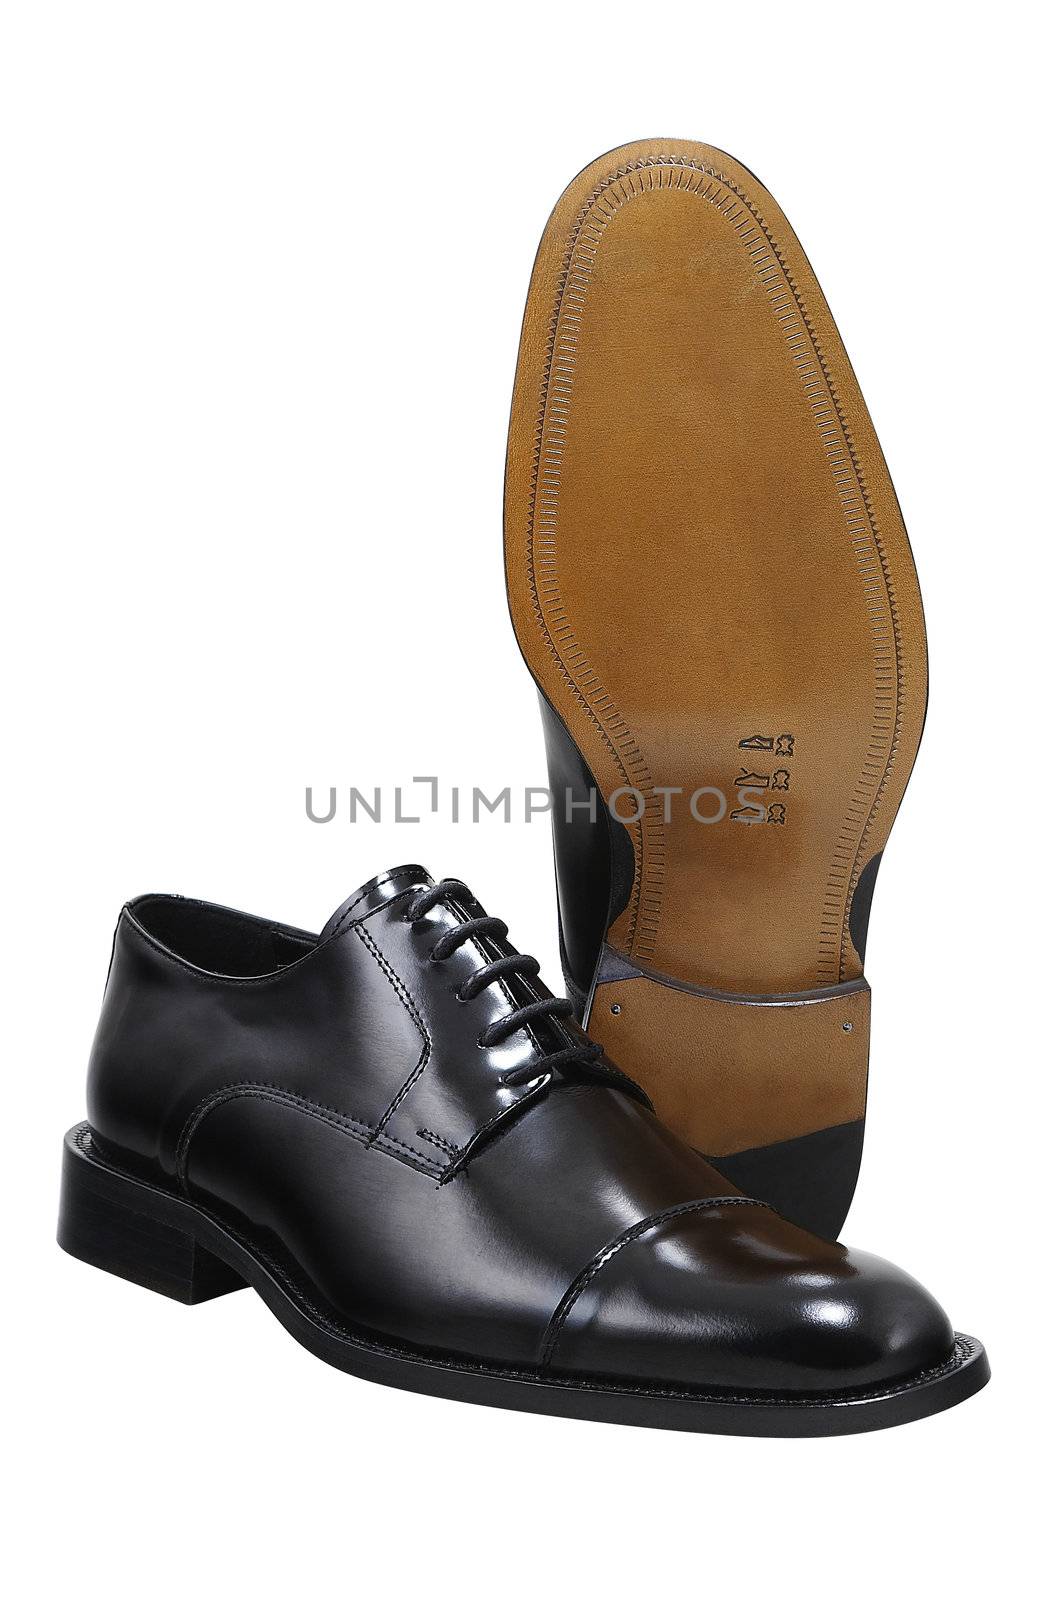 Black leather executive shoes. Clipping path included.